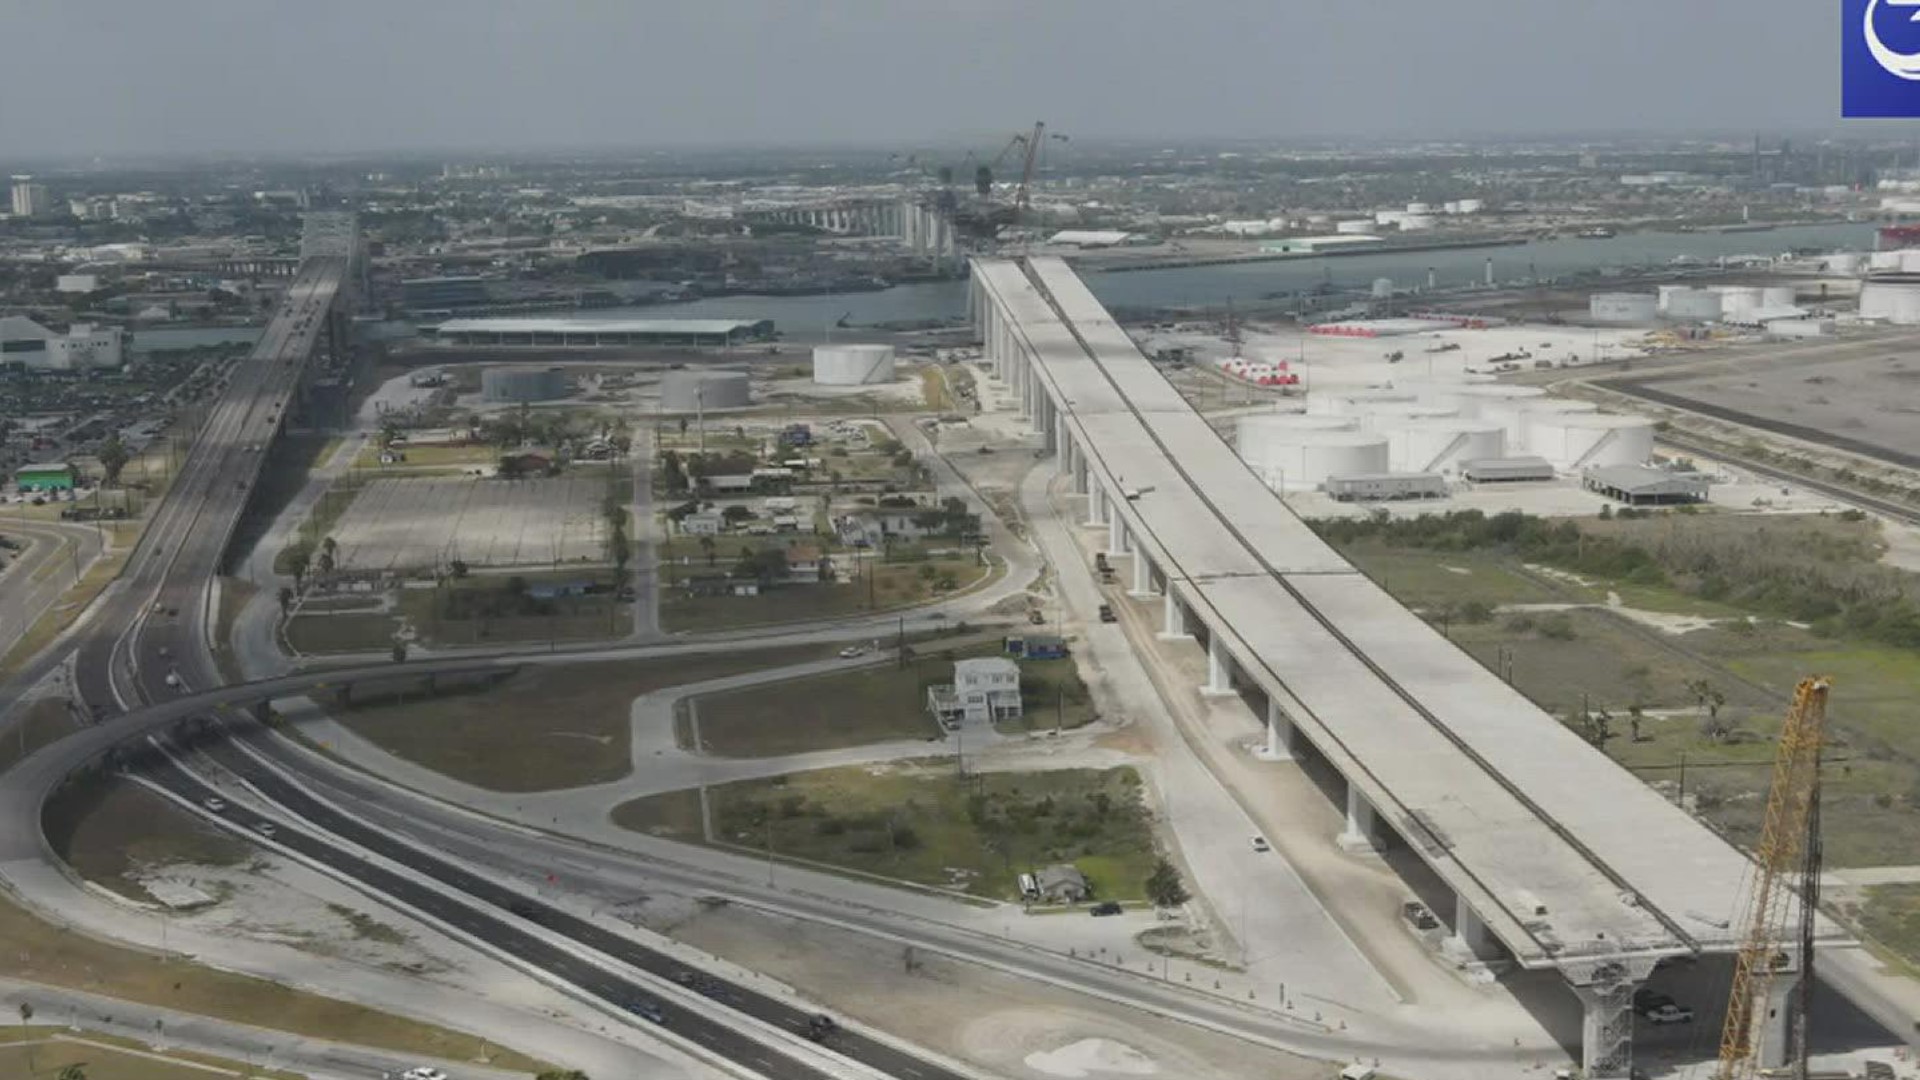 Corpus Christi Mayor Paulette Guajardo met with Nueces County congressional delegation Thursday afternoon to discuss the stoppage of the Harbor Bridge Project.